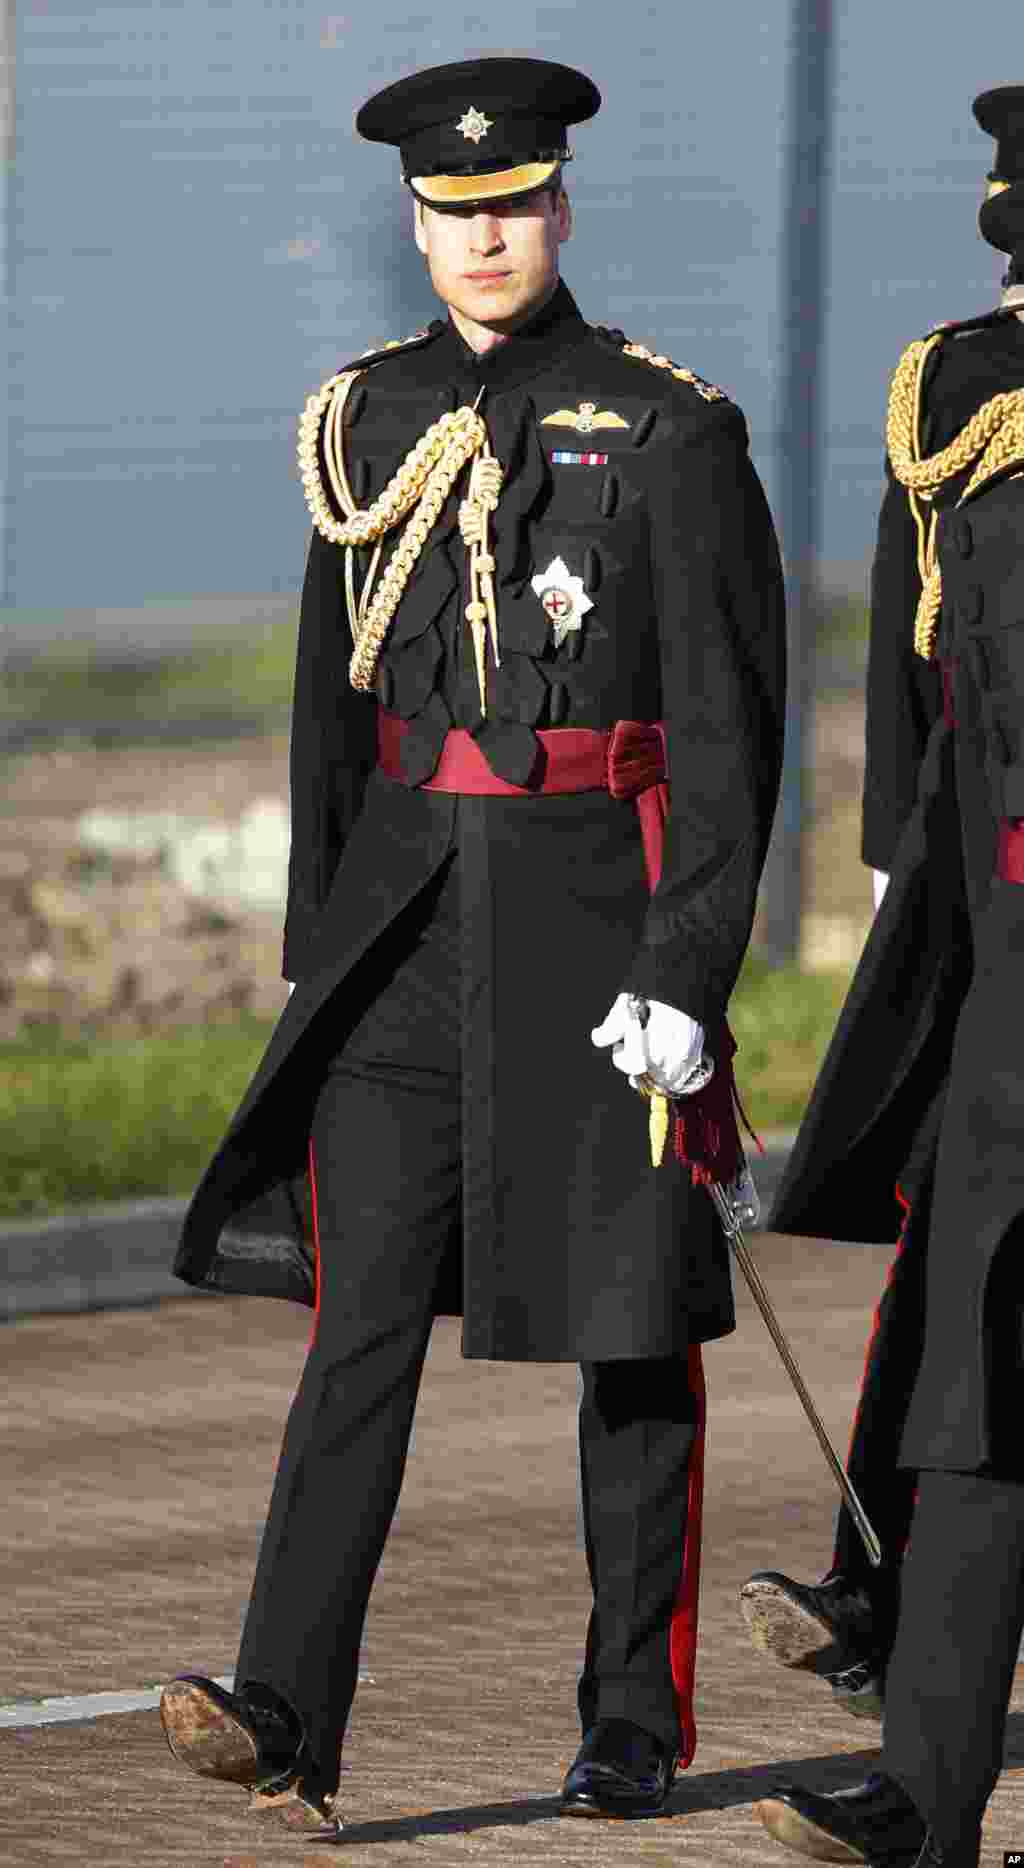 Britain's Prince William arrives at an army base in Aldershot, England, for a ceremony of presentation of operational service medals for service in Afghanistan to No2 Company of the 1st Battalion Irish Guards.